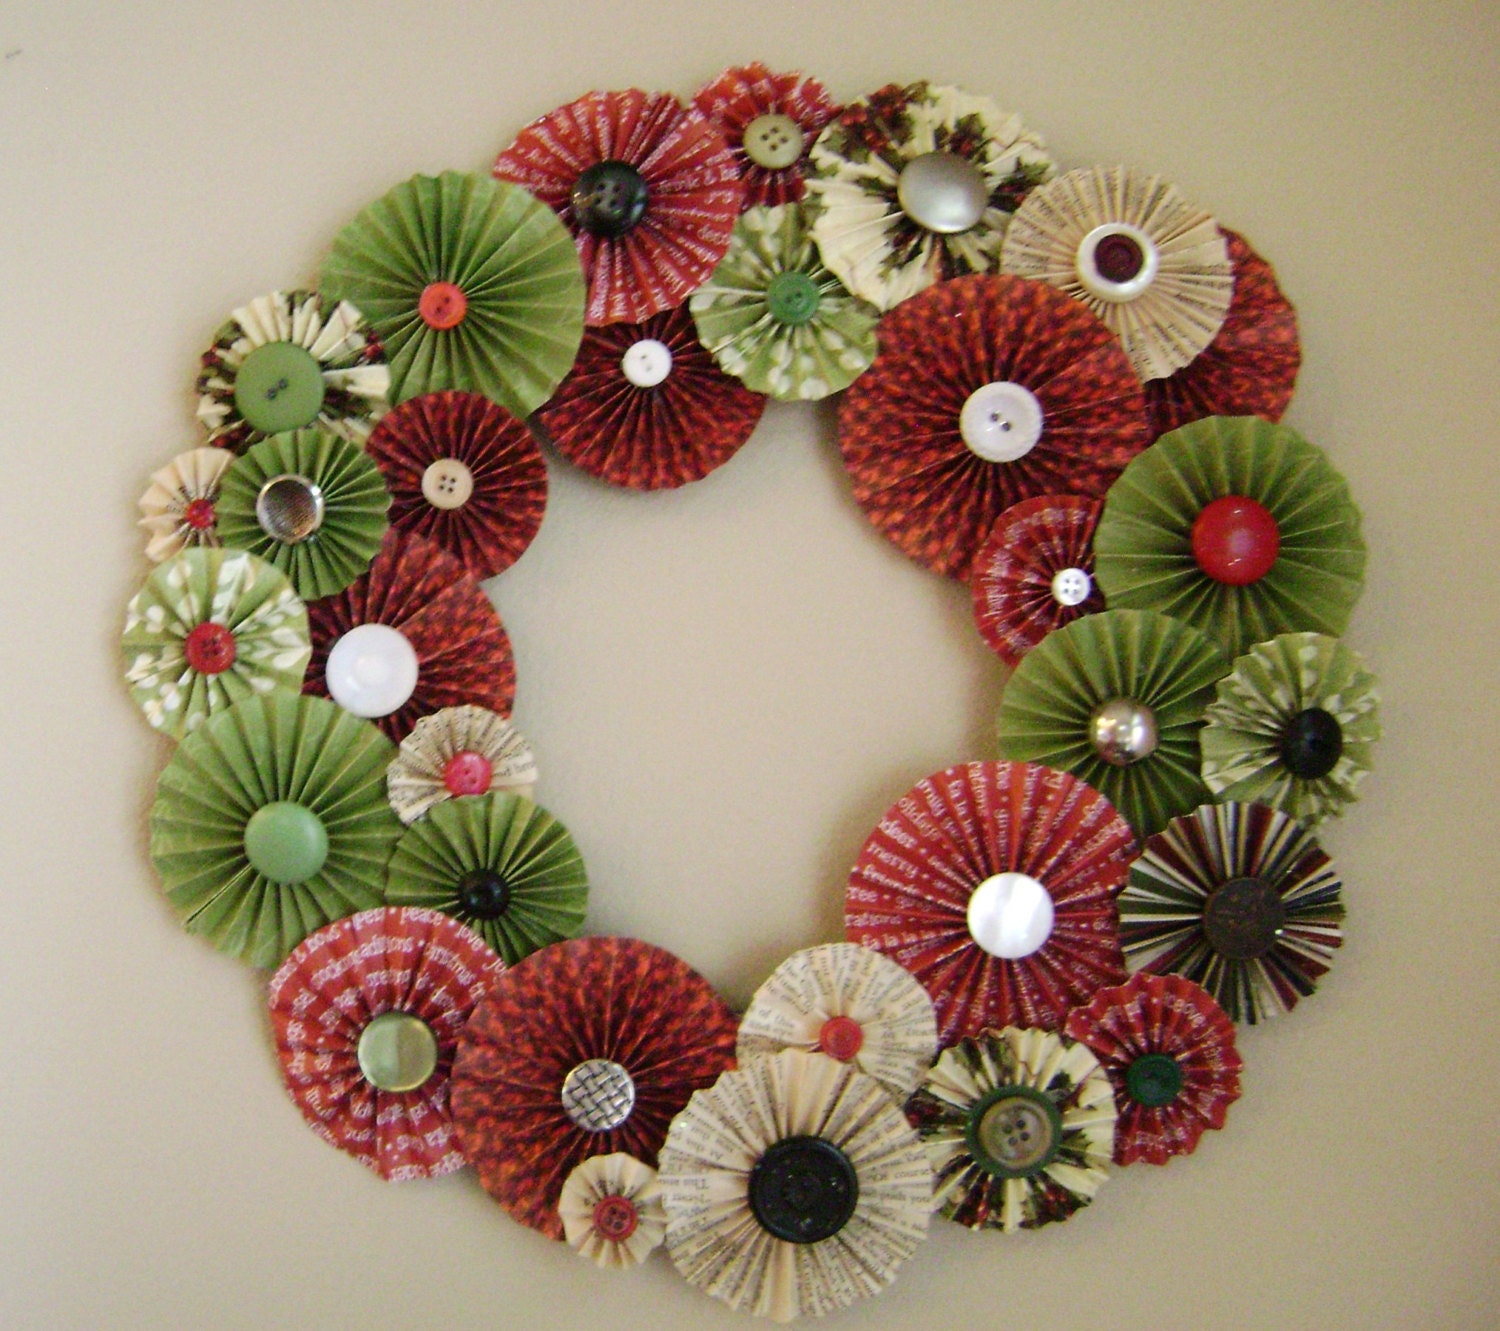 Christmas wreath red green,vintage book page fan fold accordian style pinwheel button centers